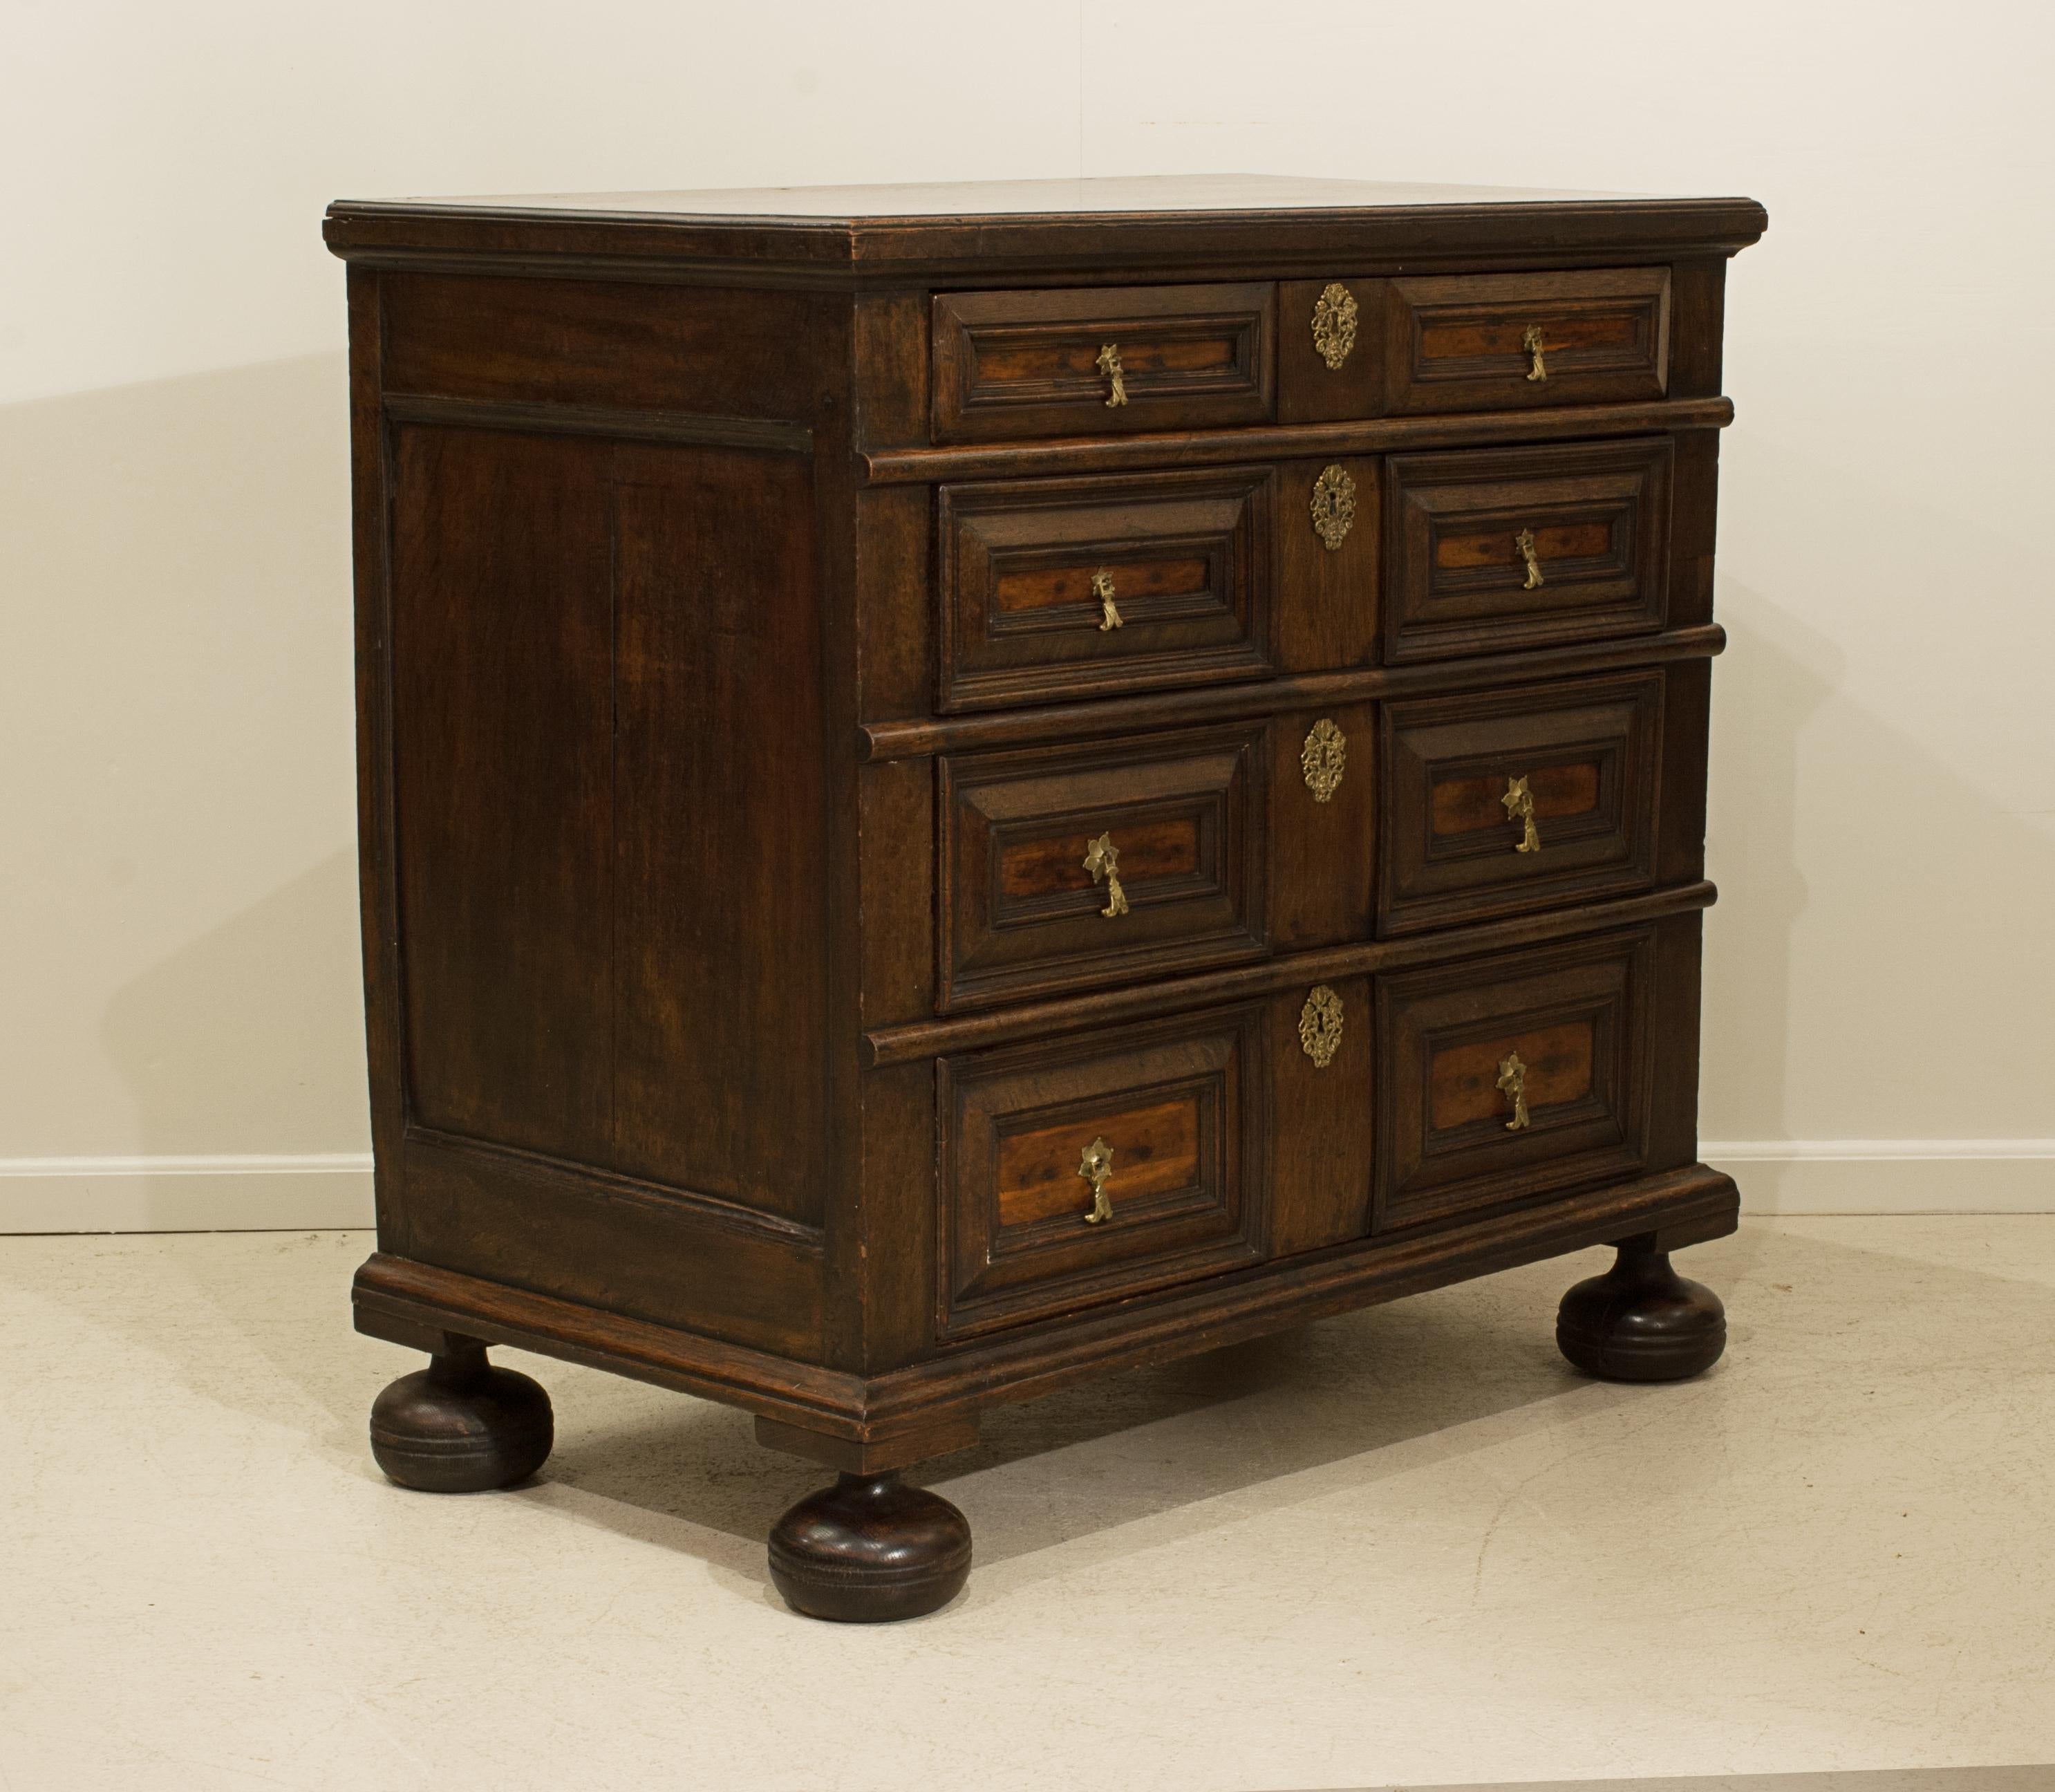 Jacobean Style Chest Of Drawers.
A Jacobean style oak chest of drawers raised on four large bun feet. The graduating cushion moulding drawers are full length and with brass drop handles with back plates.
A very nice late 18th early 19th century